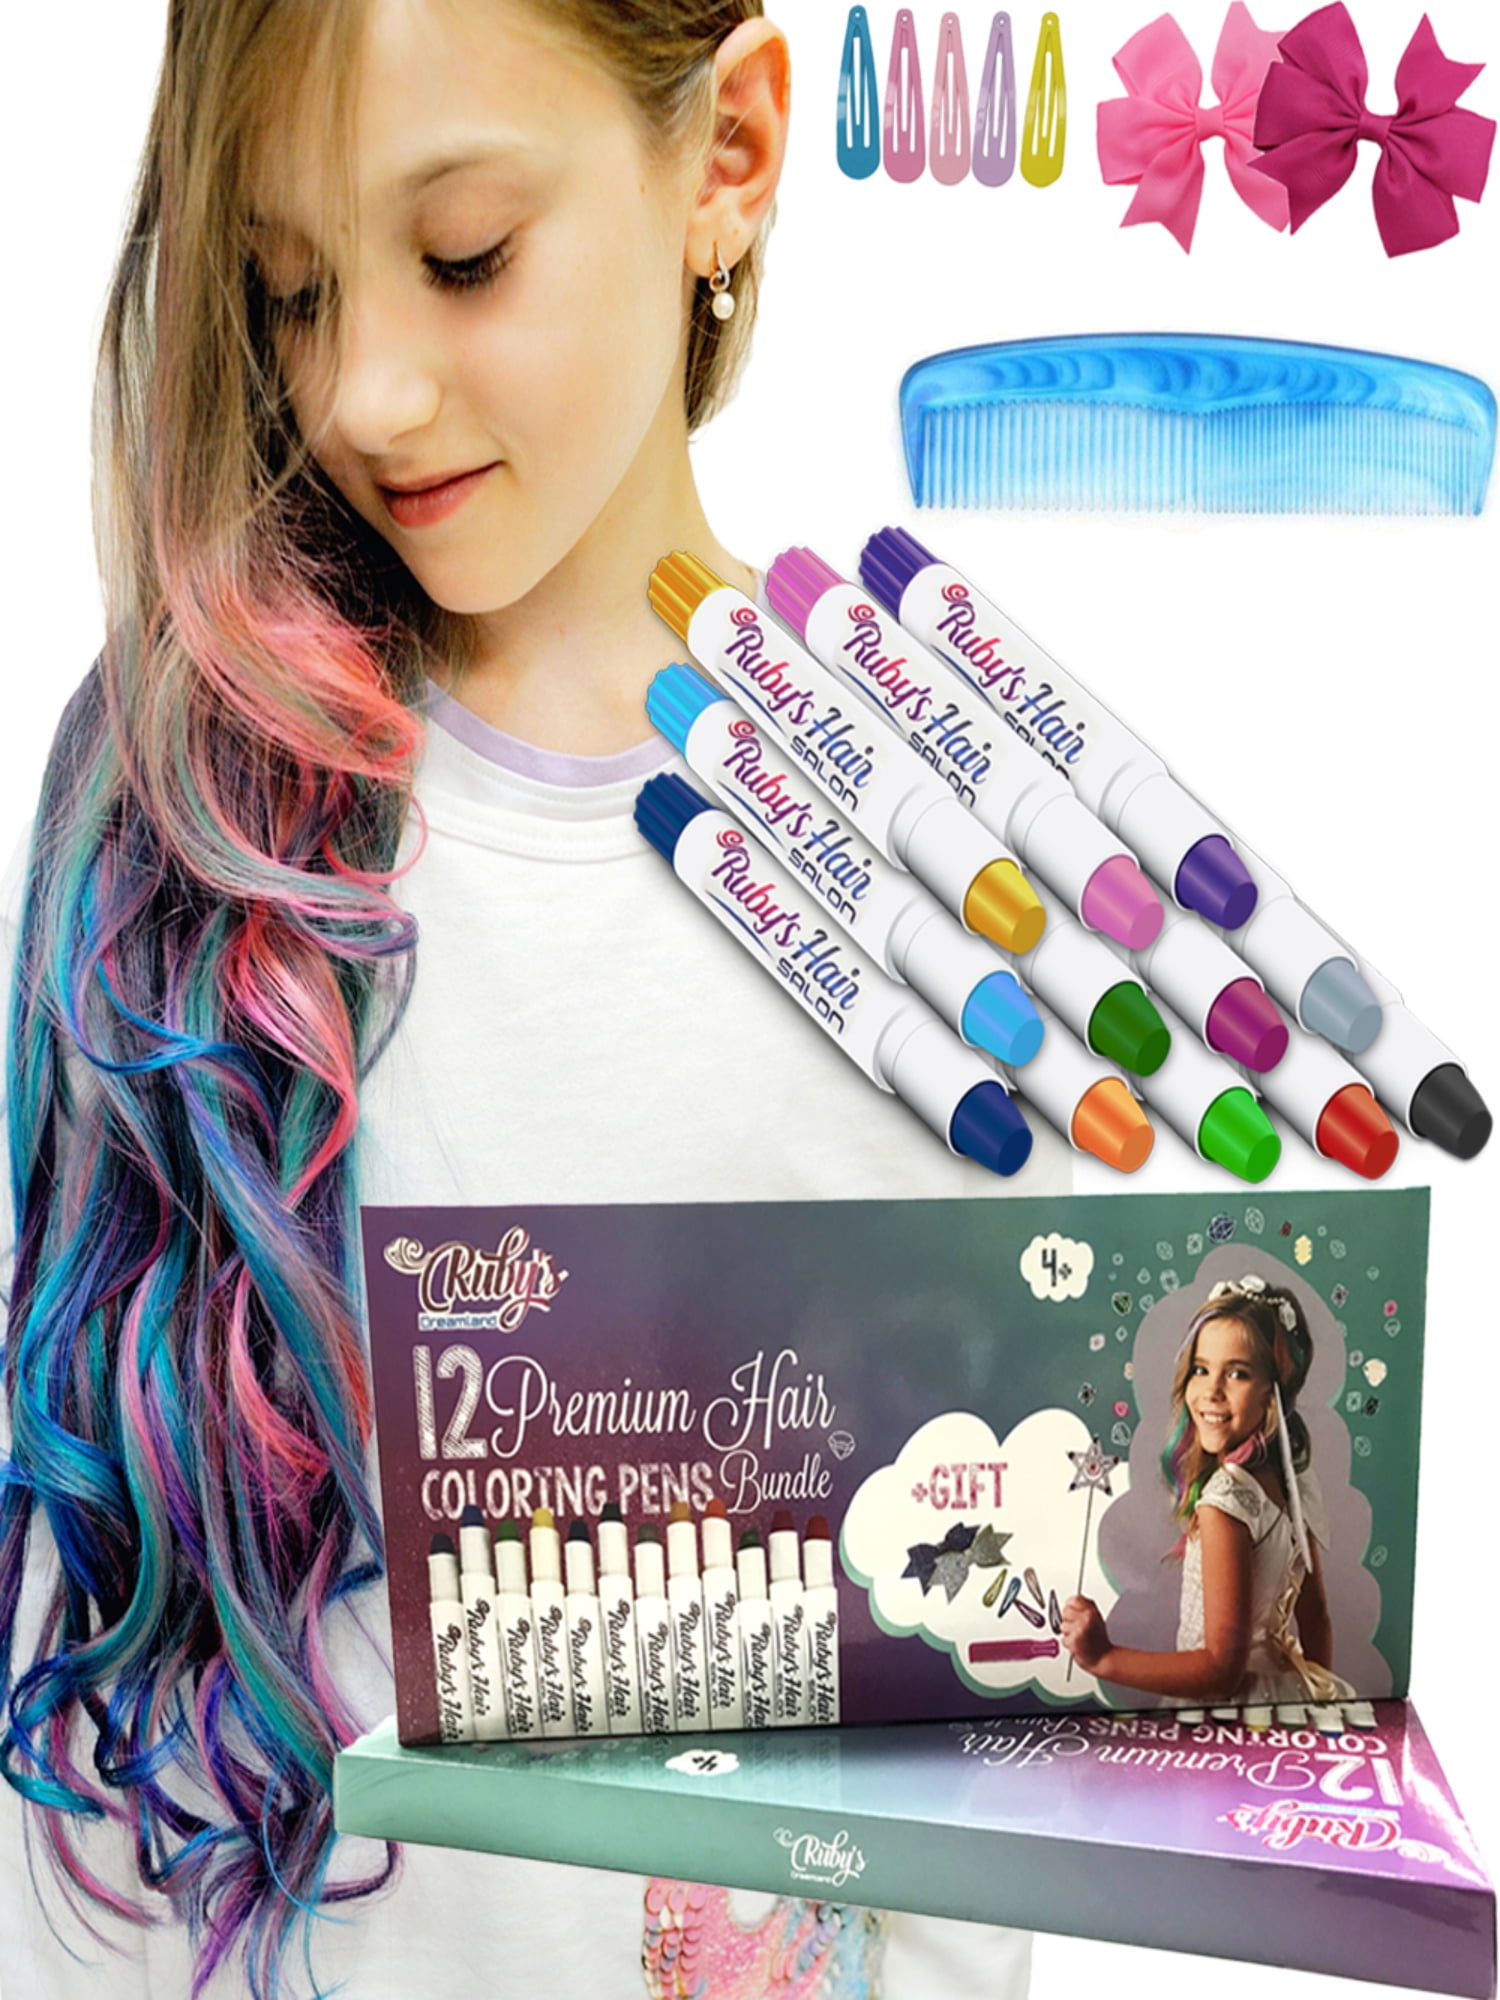 GirlZone Hair Chalk Set For Girls - 10 Piece Temporary Hair Chalks Color -  Girl Toys For Girls Ages 8-12 - Birthday Gifts For Girls - Gifts For 7 8 9  10 11 Year Old Girls - Girls Toys 8-10 Years Old